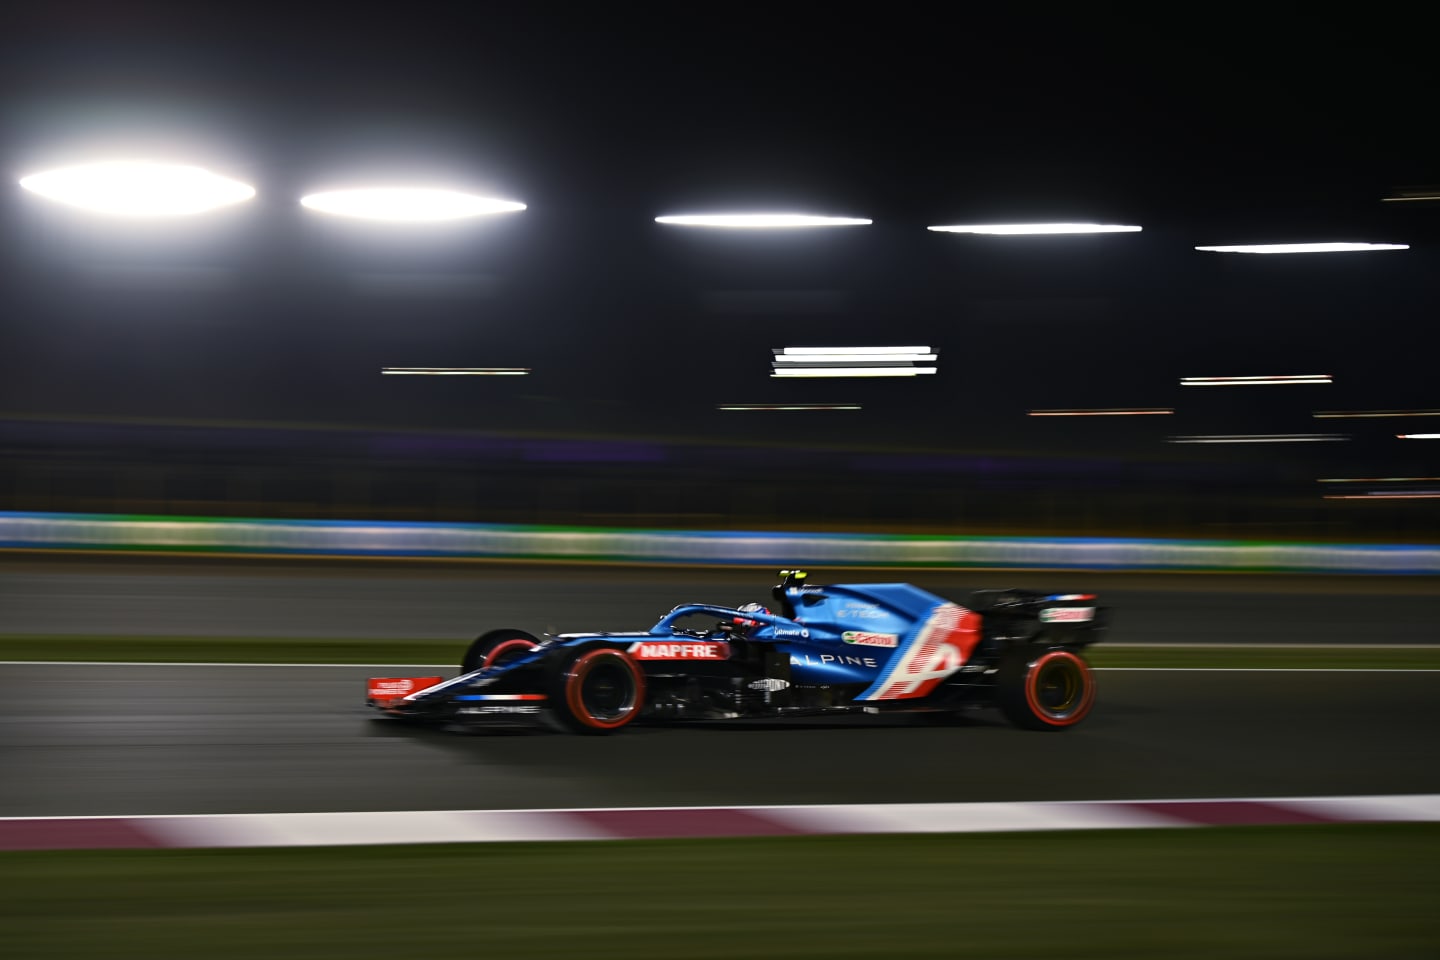 DOHA, QATAR - NOVEMBER 20: Esteban Ocon of France driving the (31) Alpine A521 Renault during qualifying ahead of the F1 Grand Prix of Qatar at Losail International Circuit on November 20, 2021 in Doha, Qatar. (Photo by Clive Mason/Getty Images)